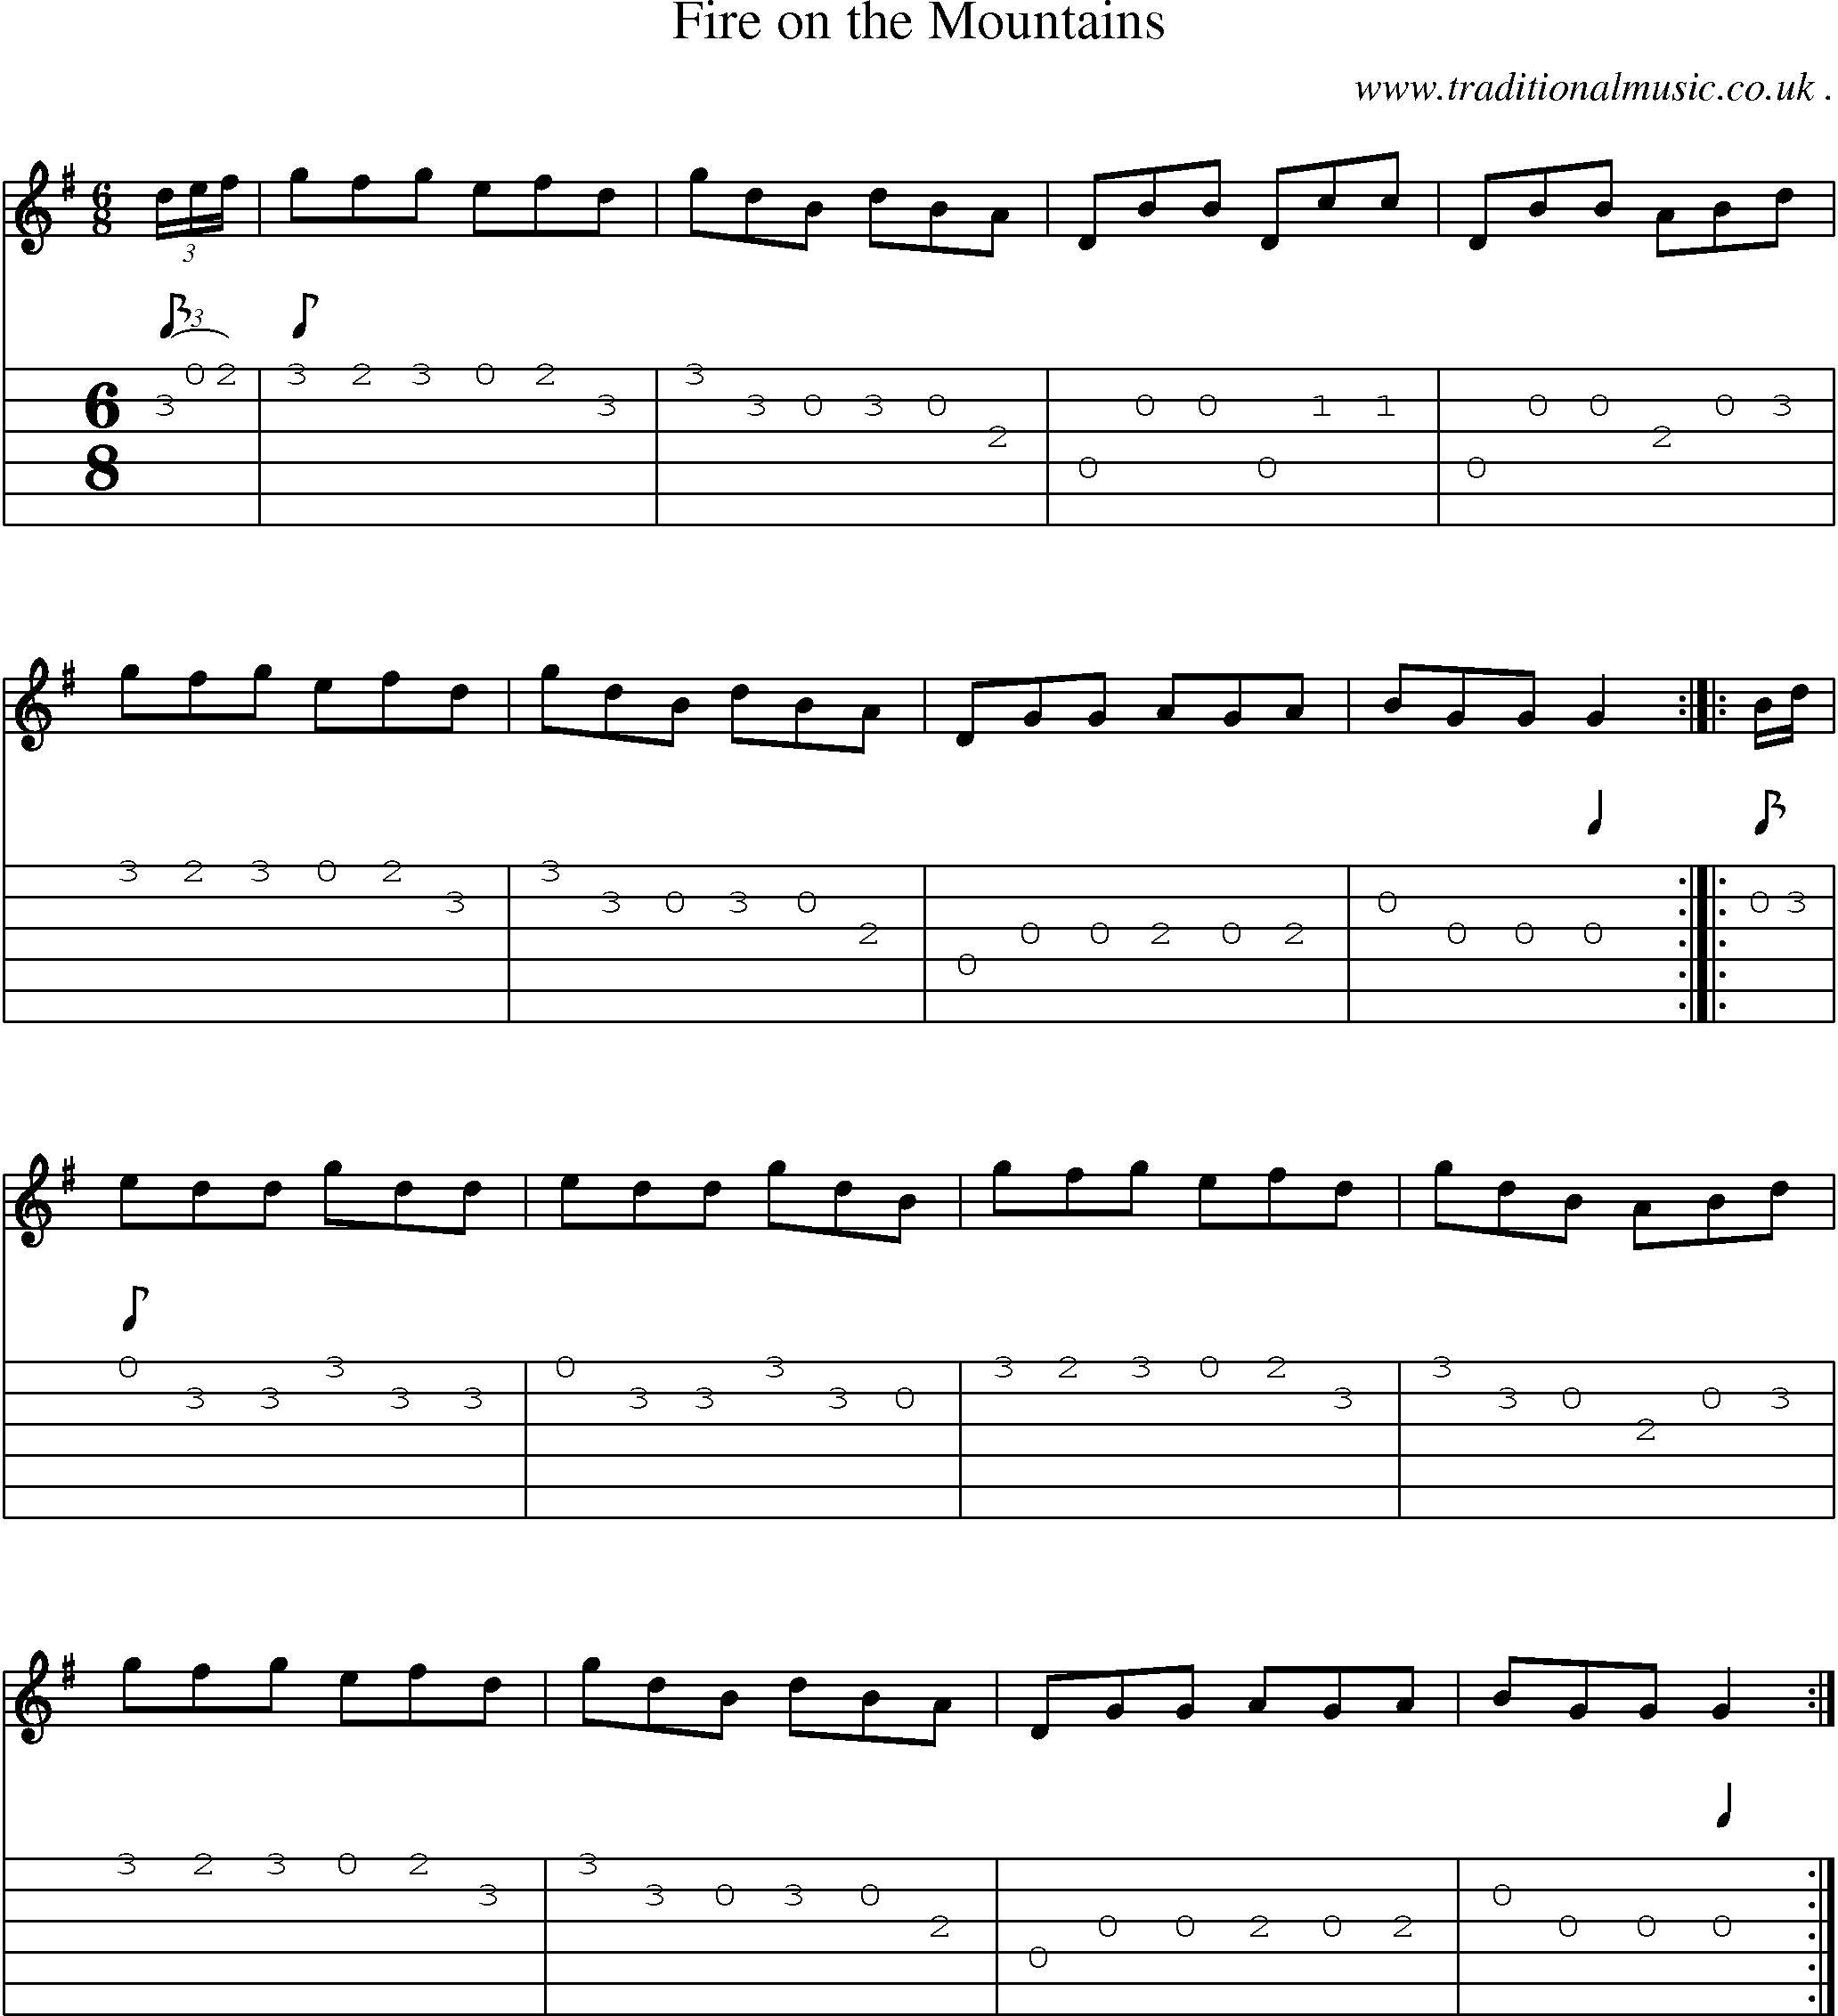 Sheet-Music and Guitar Tabs for Fire On The Mountains